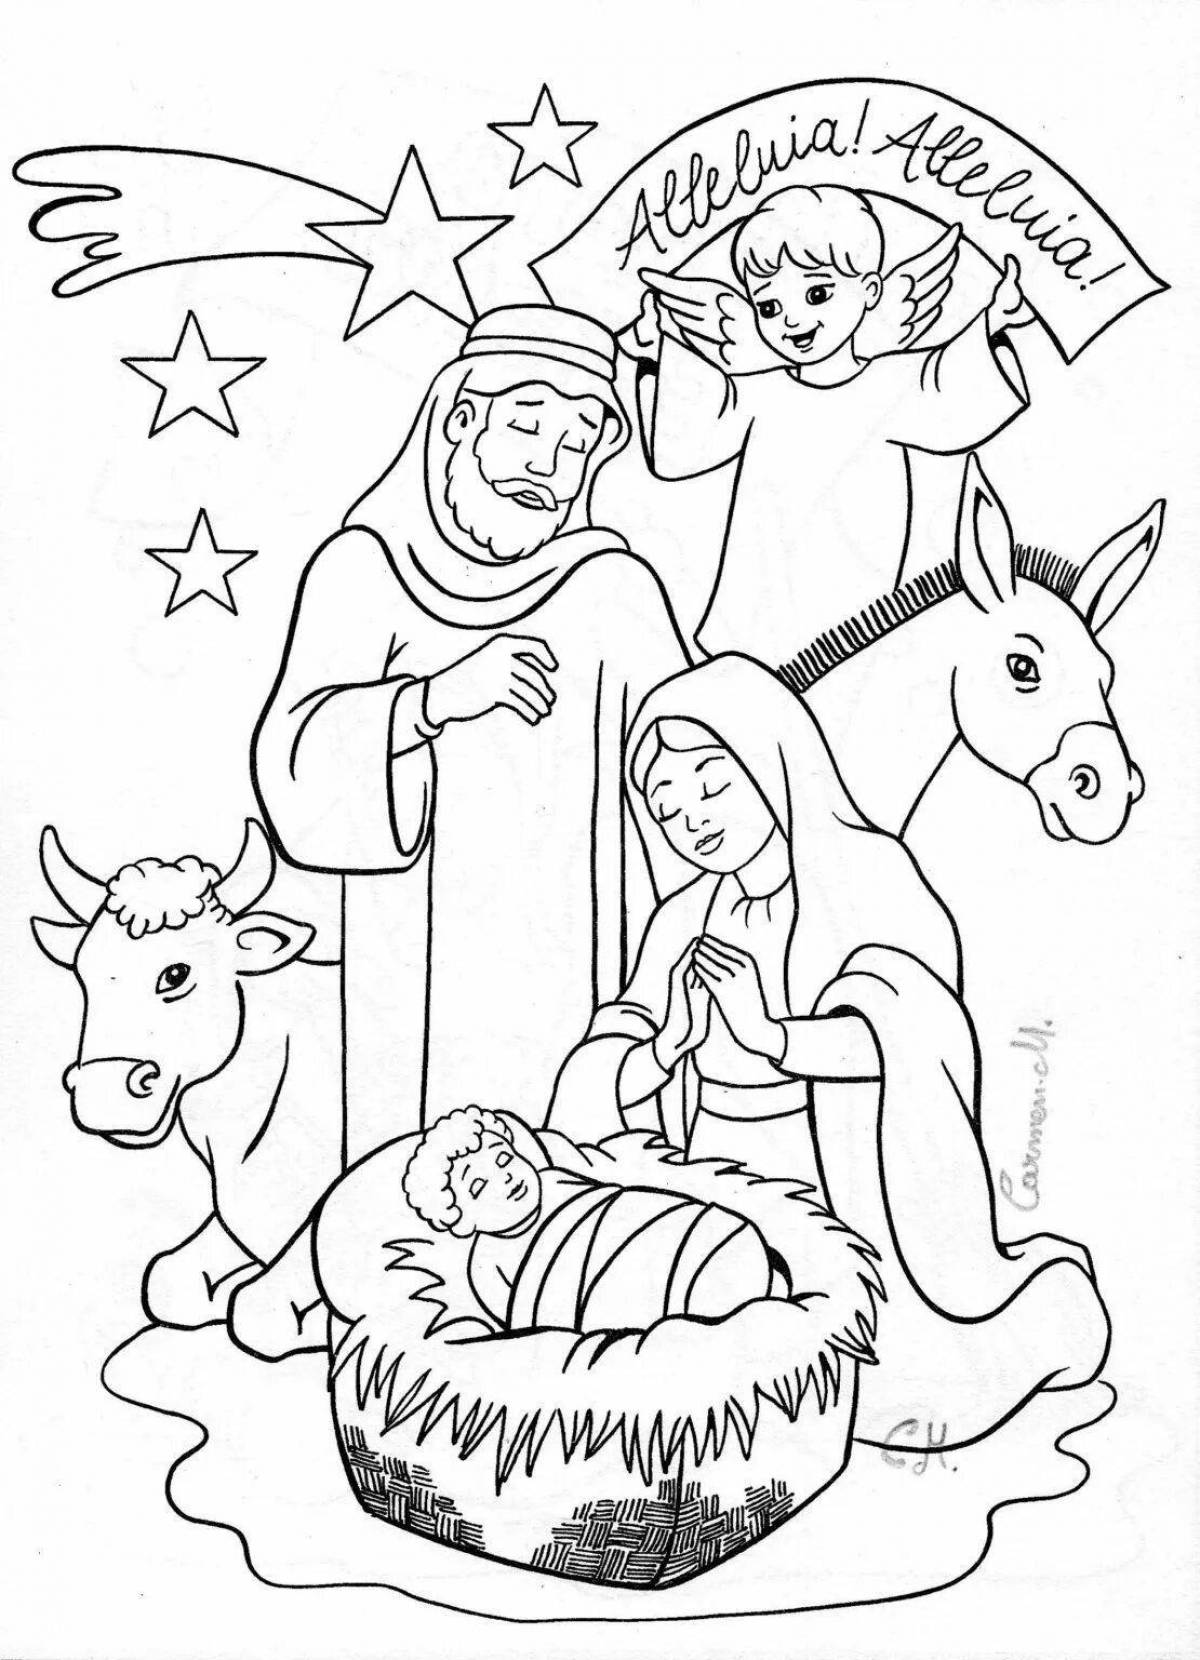 Scenic Christmas coloring book